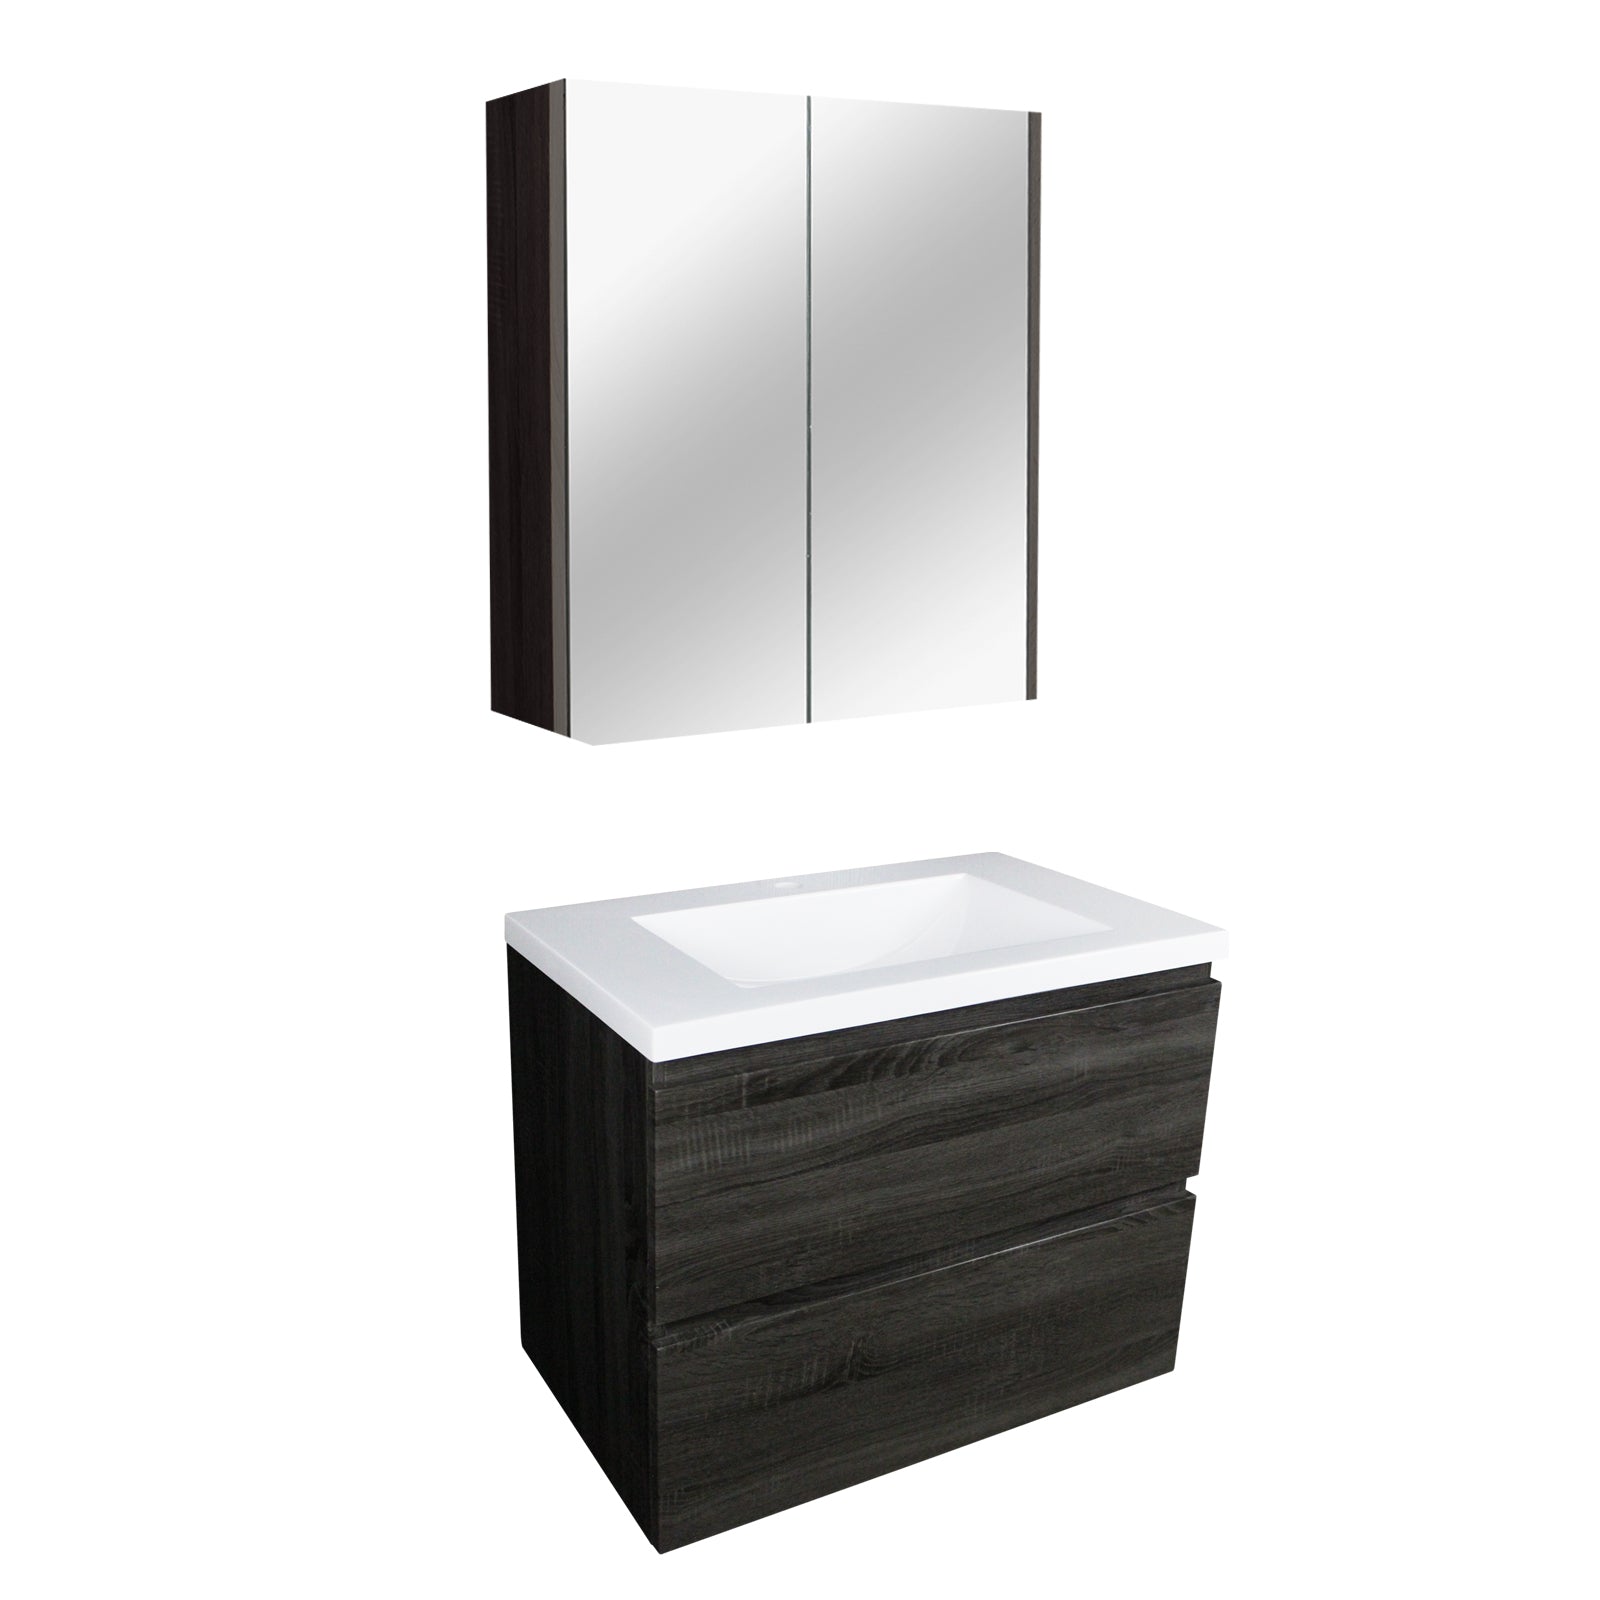 POSEIDON QUBIST DARK GREY MIRROR SHAVING CABINETS (AVAILABLE IN 600MM, 750MM AND 900MM)